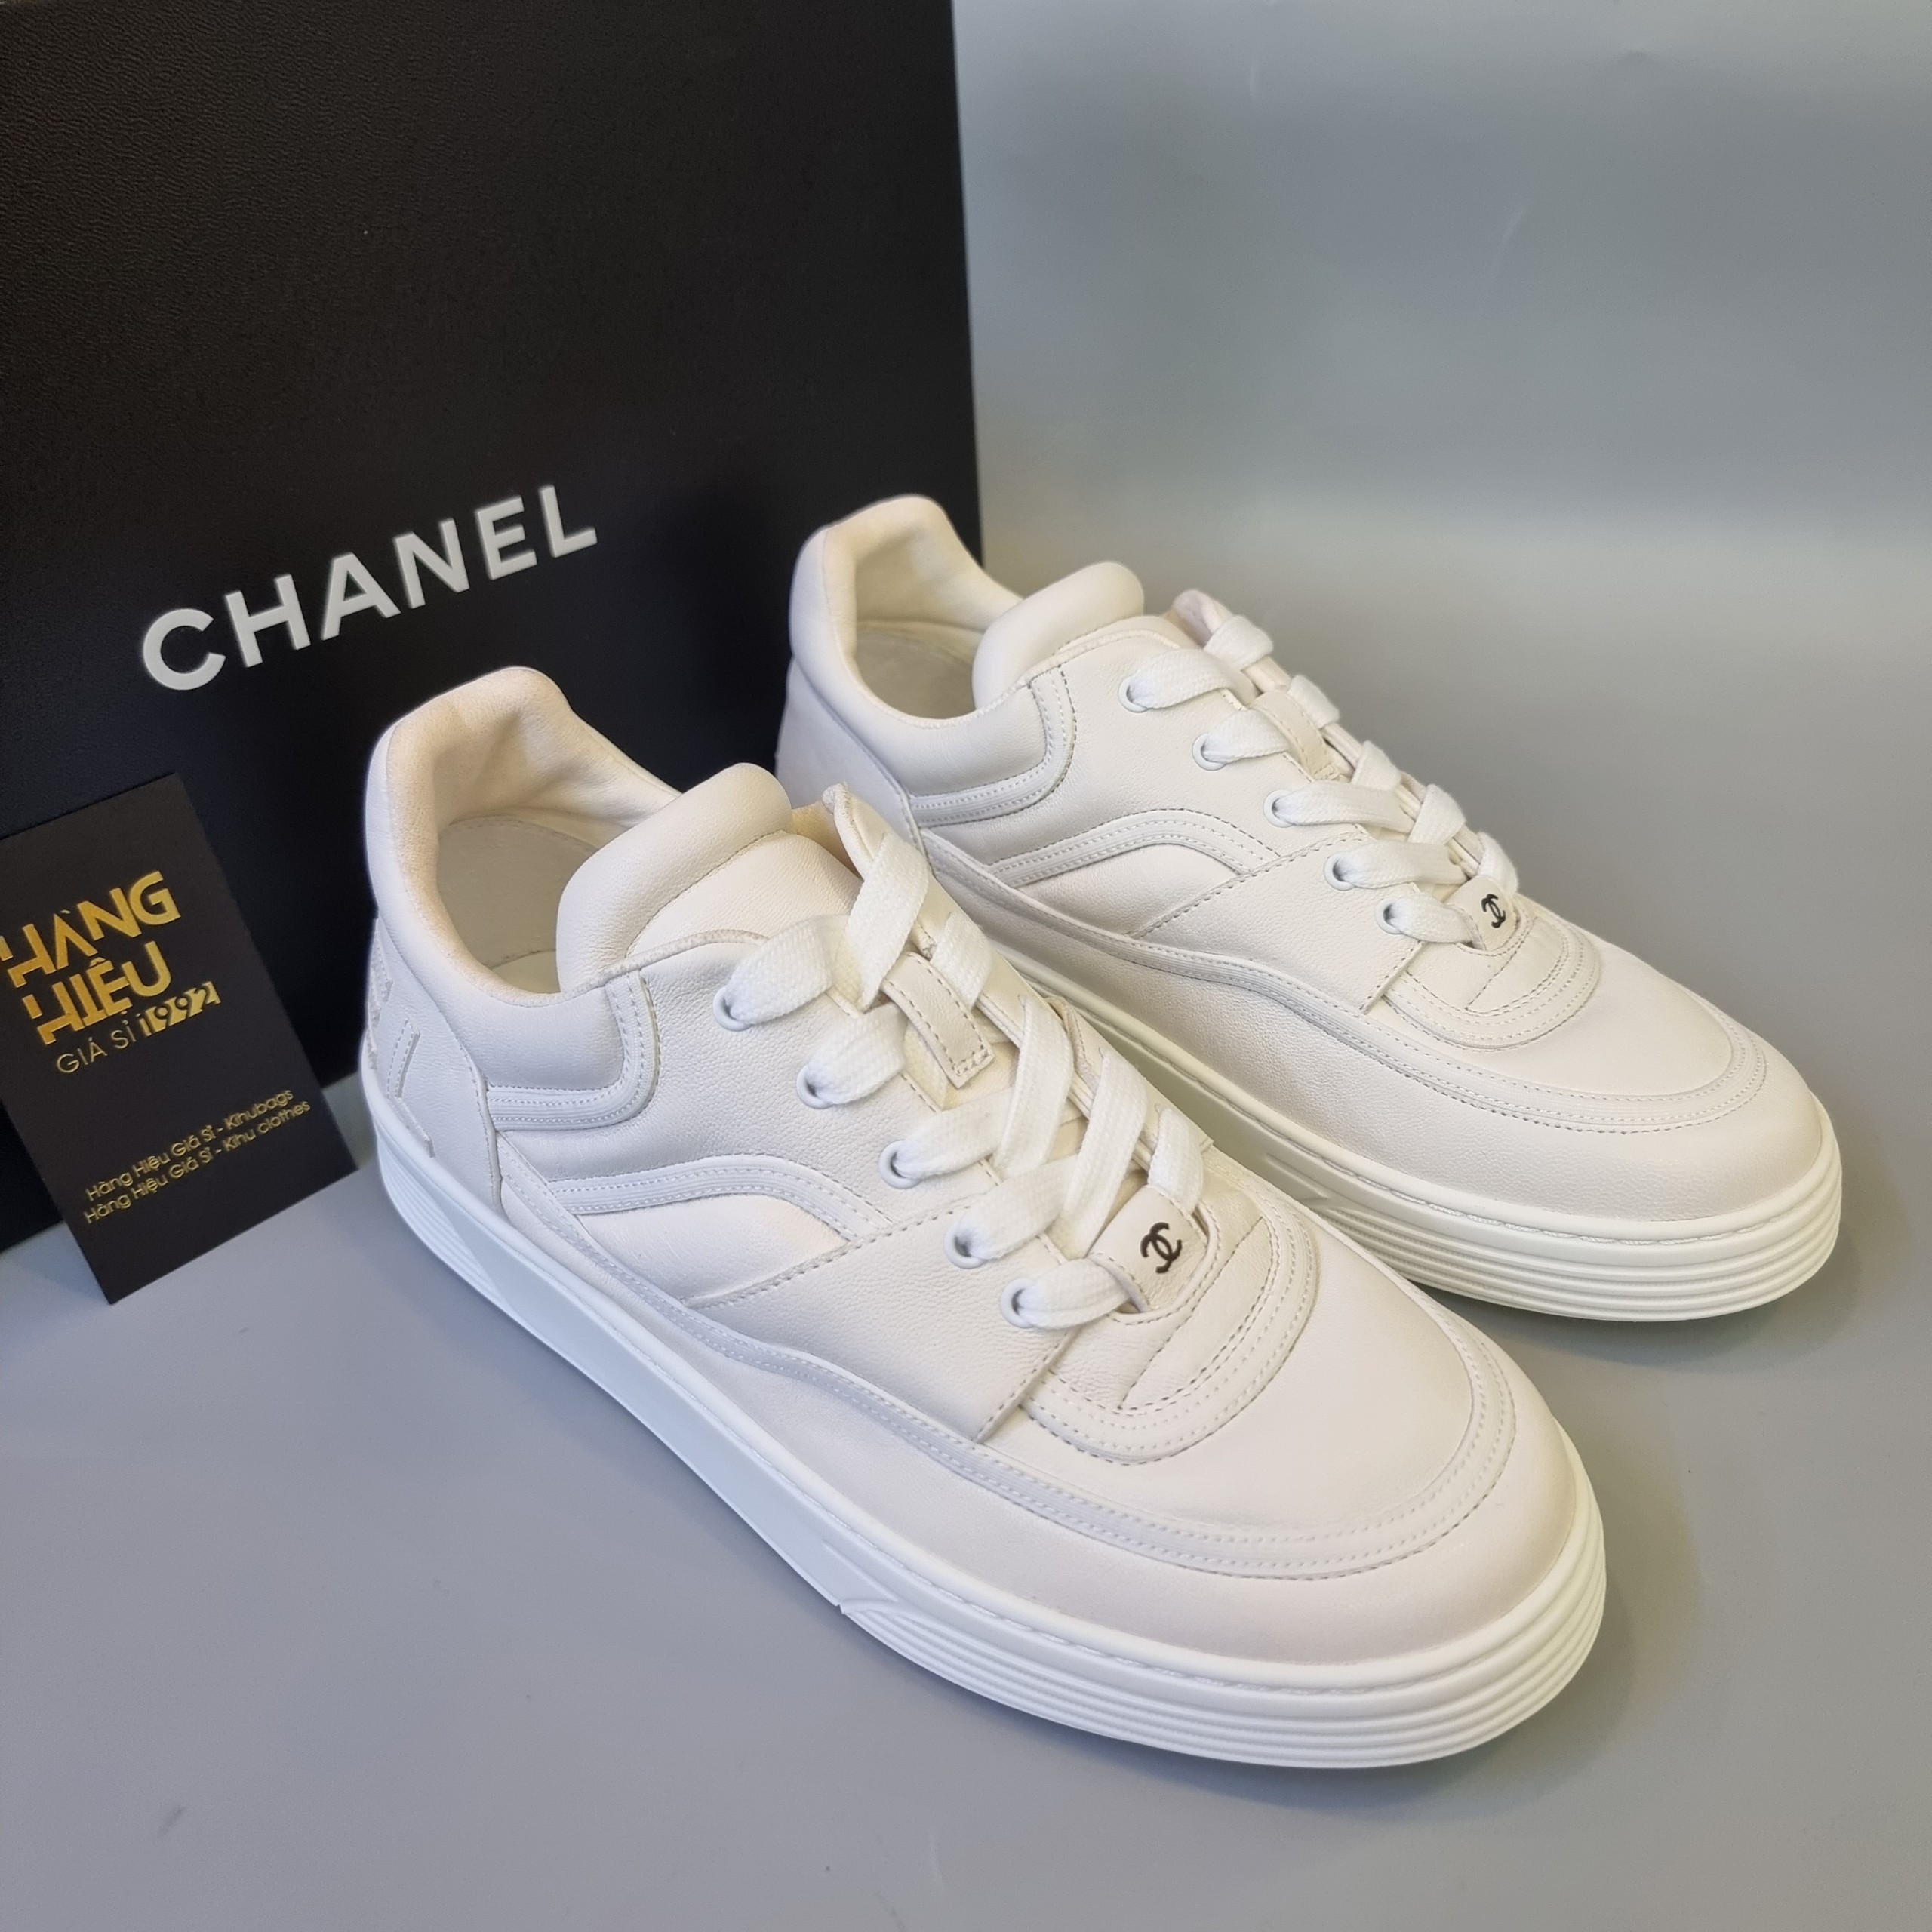 Chanels Sneaker Game Is Quietly Improving